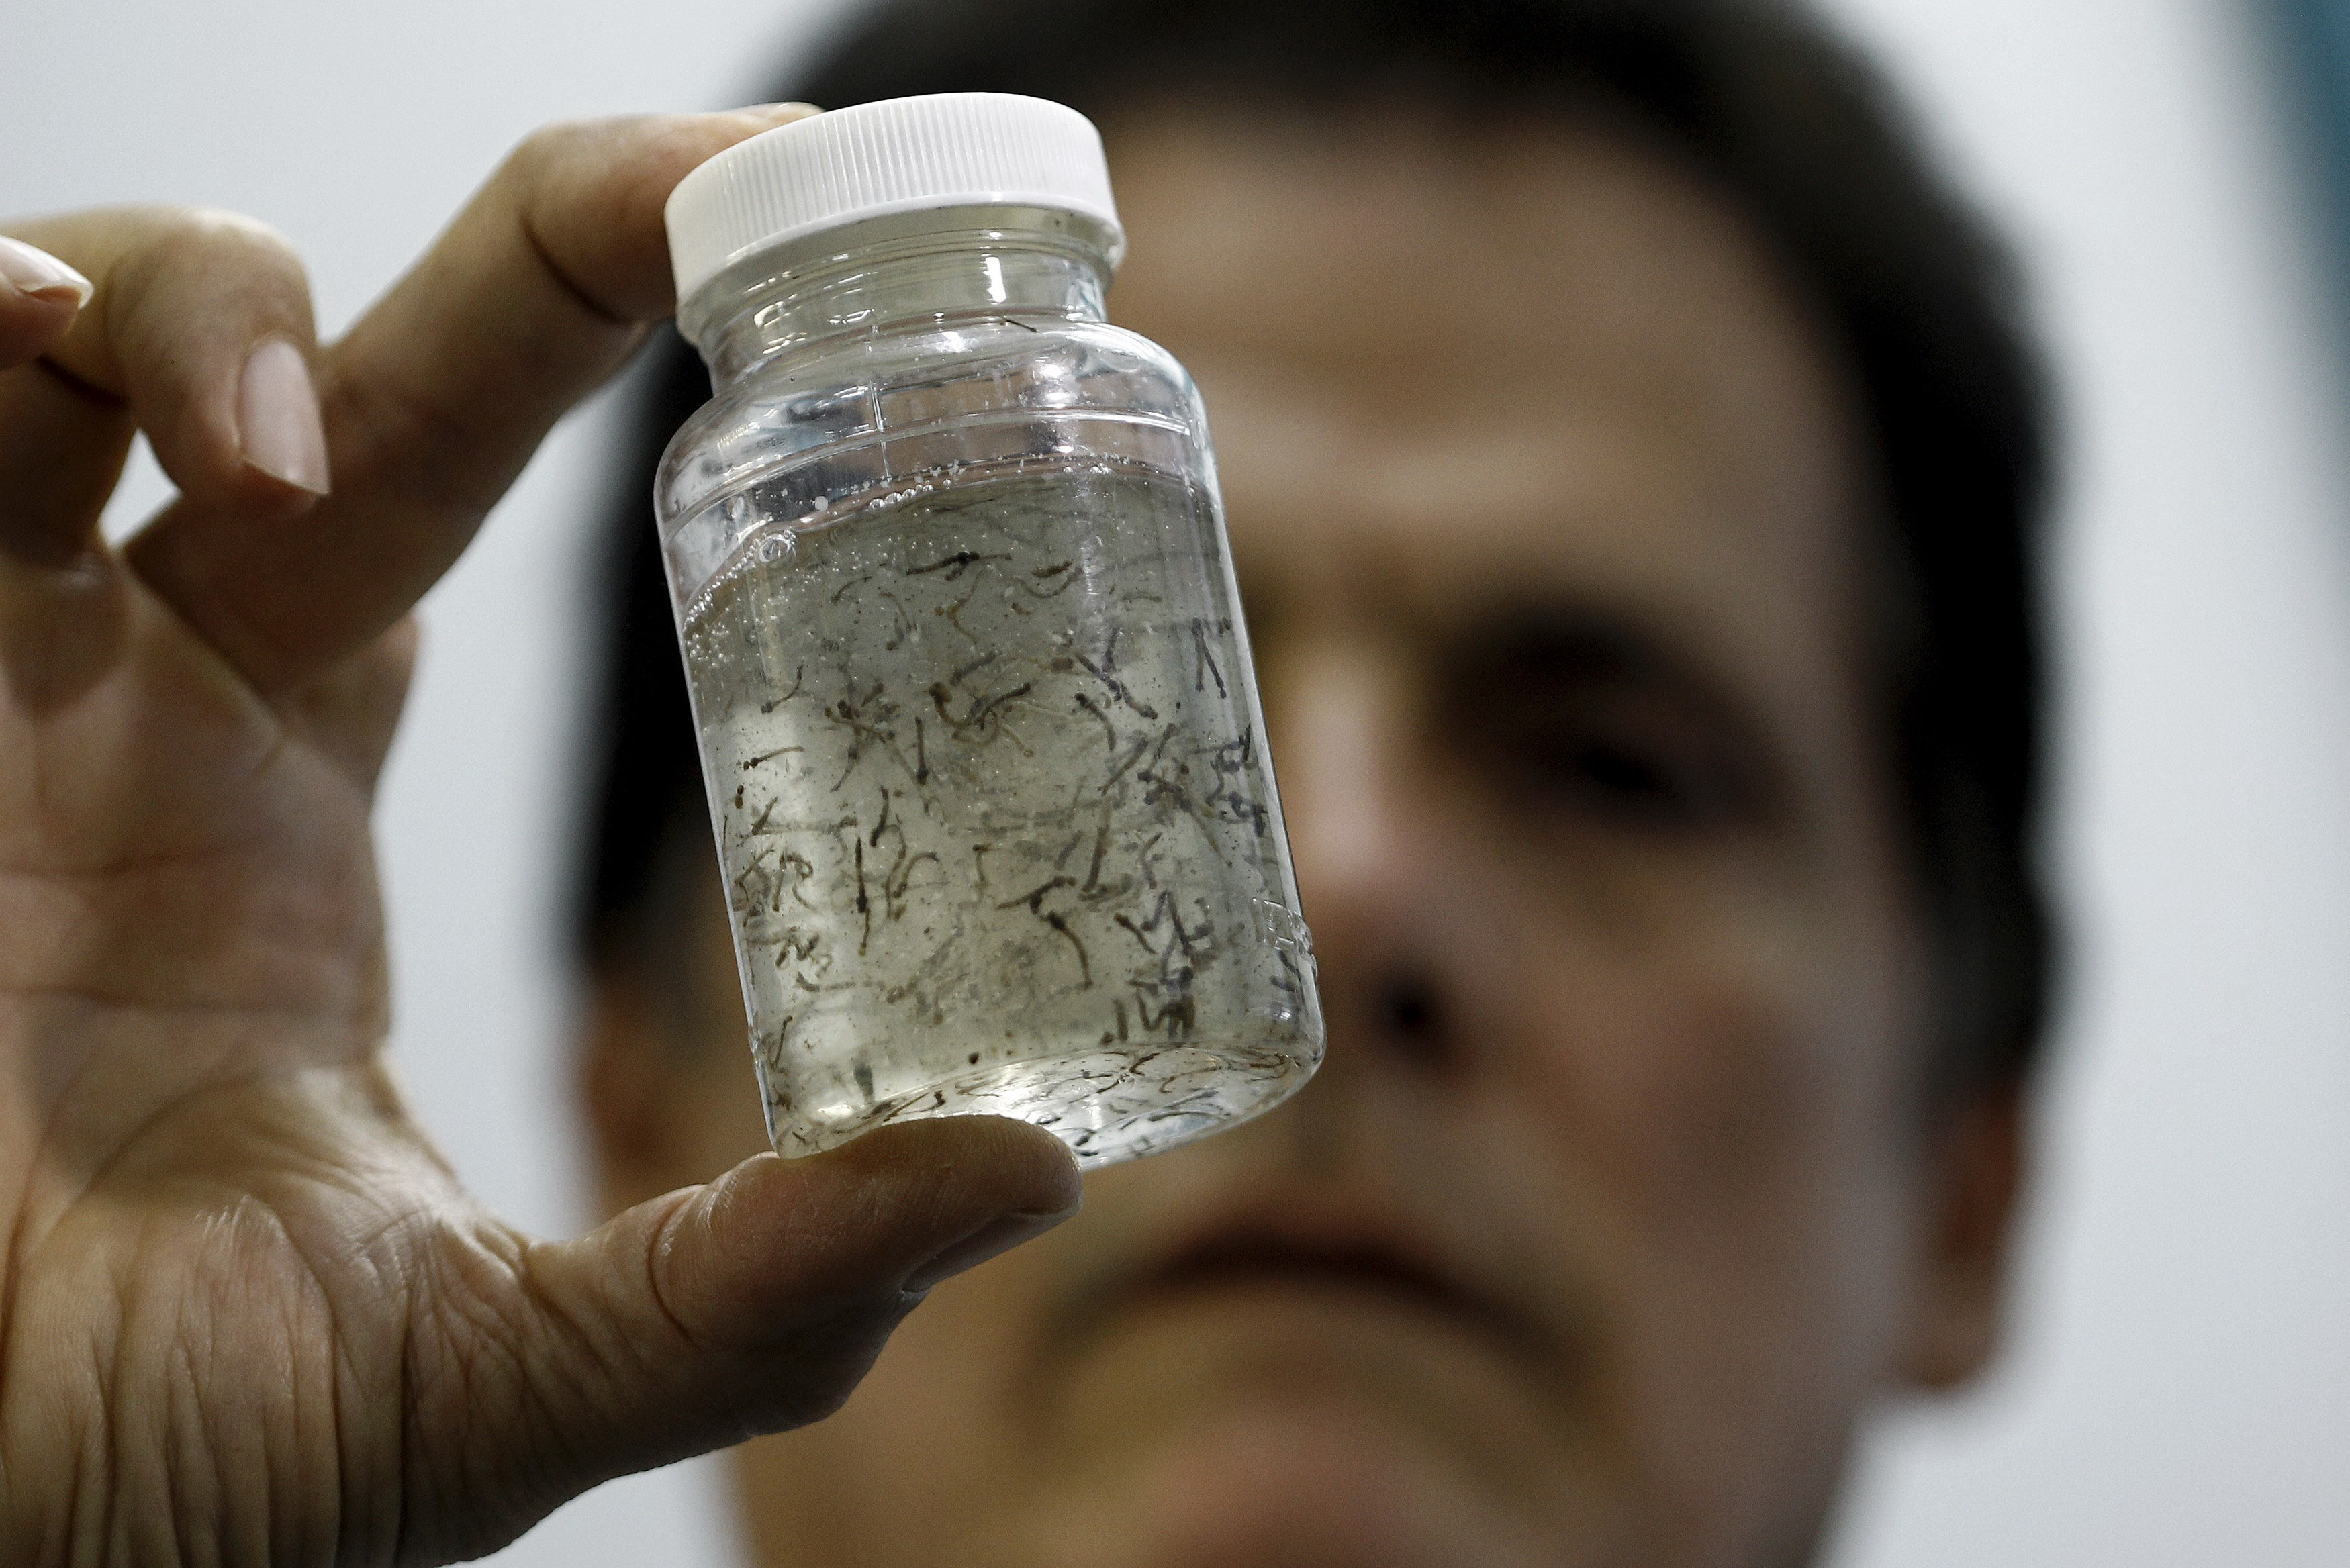 WHO says extremely alarmed by Zika, could reach 4 million cases